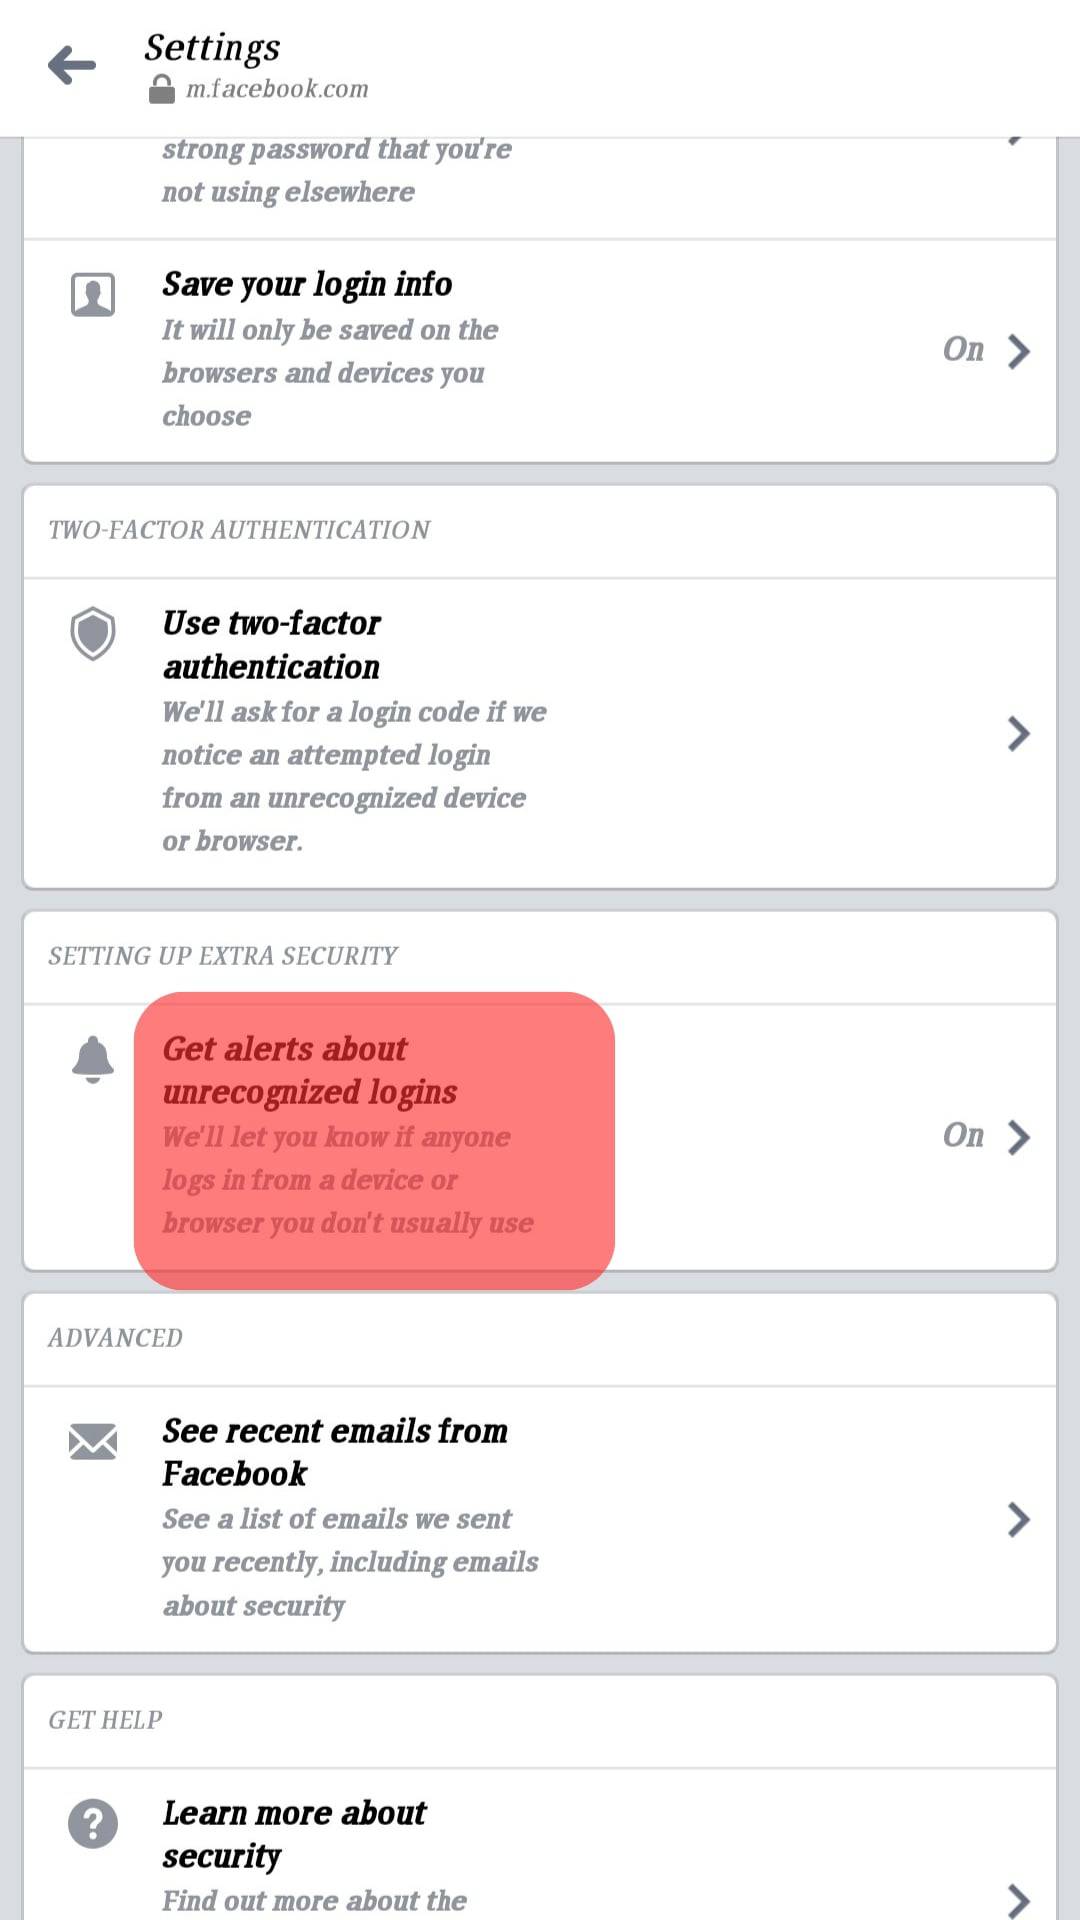 Locate The Get Alerts About Unrecognised Login Option